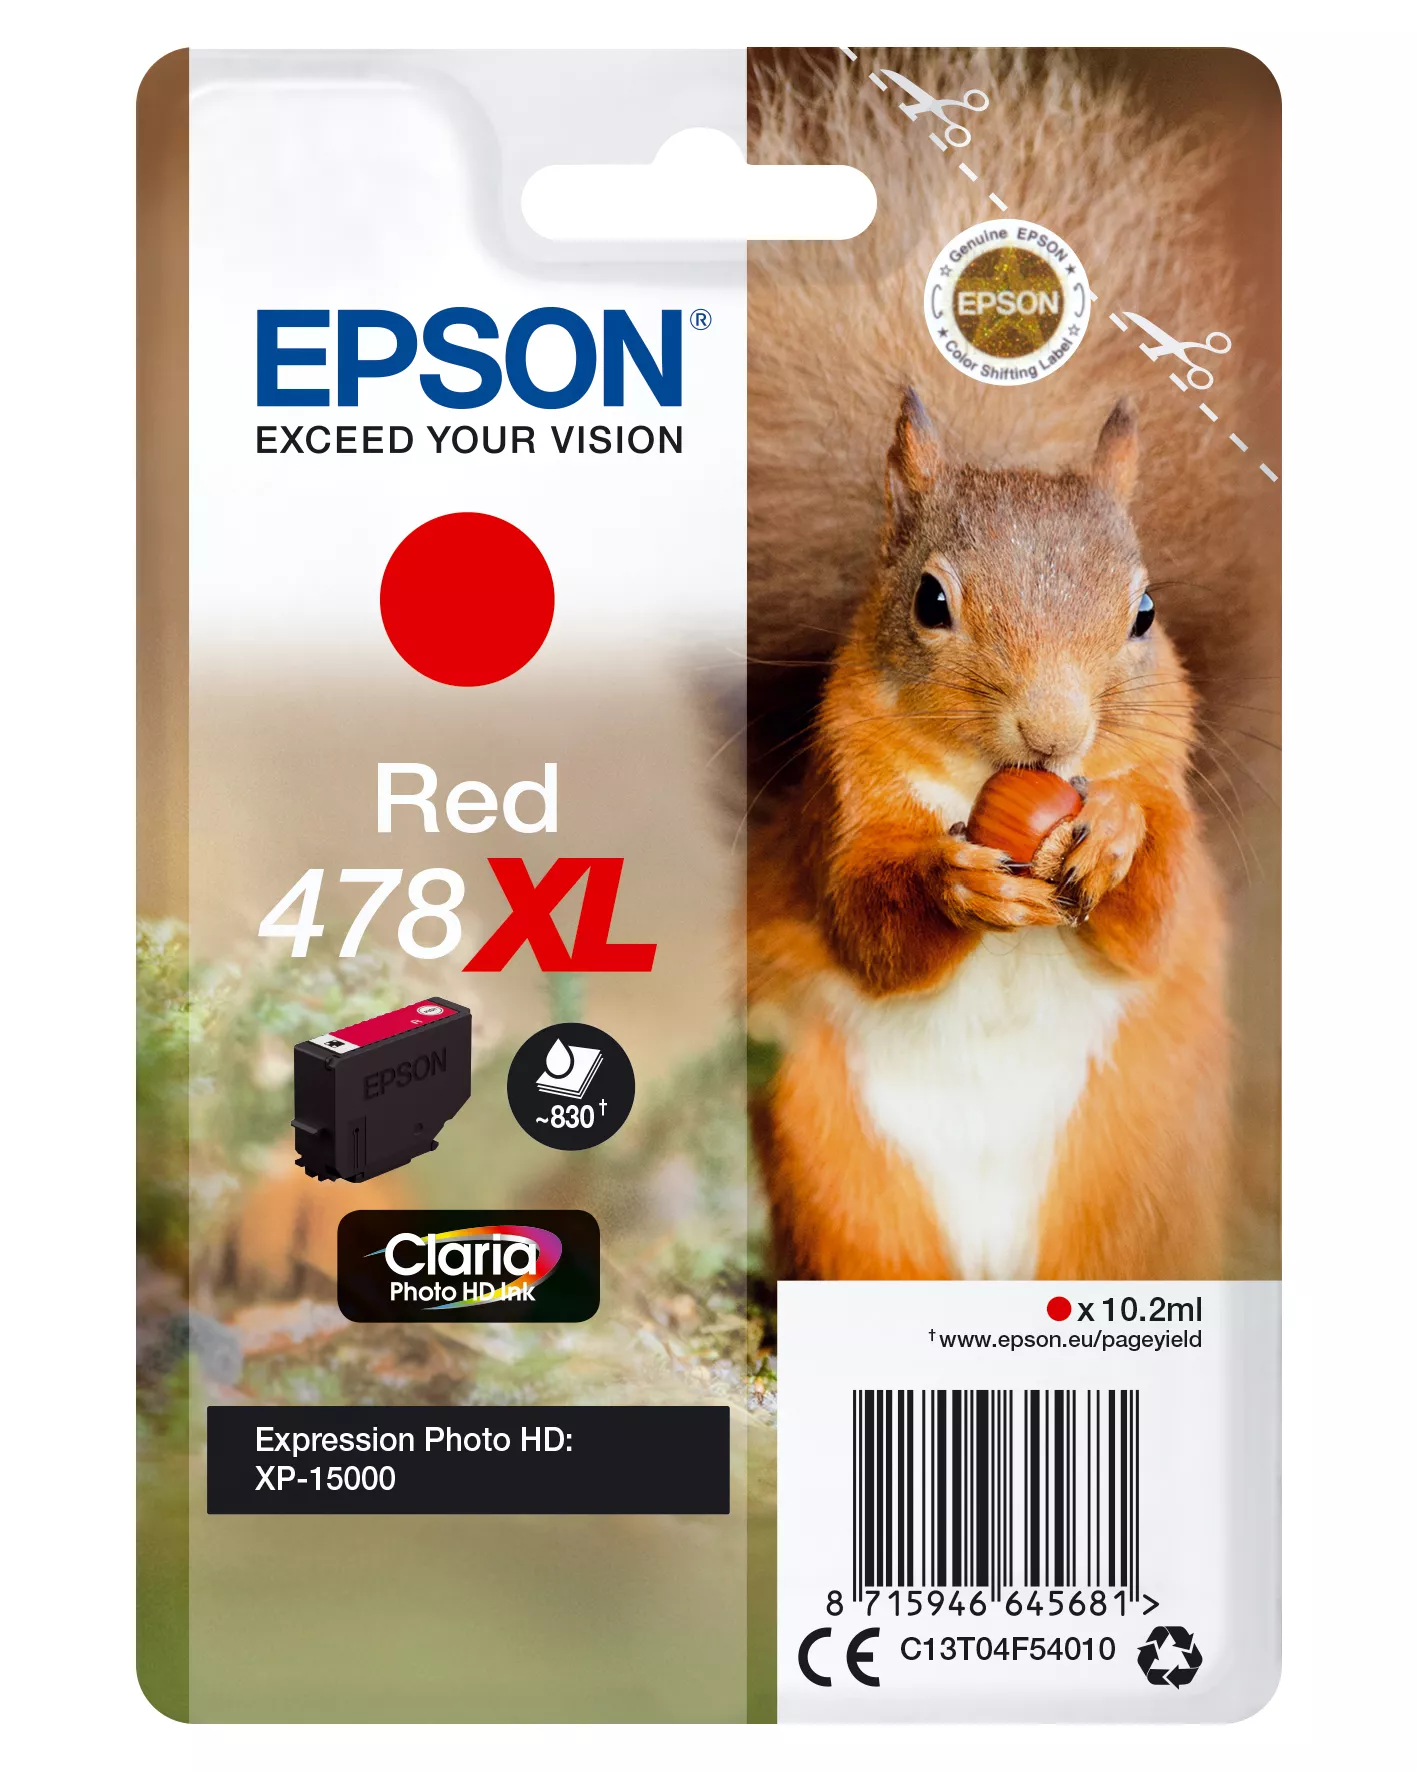 Achat Cartouches d'encre Epson Squirrel Singlepack Red 478XL Claria Photo HD Ink